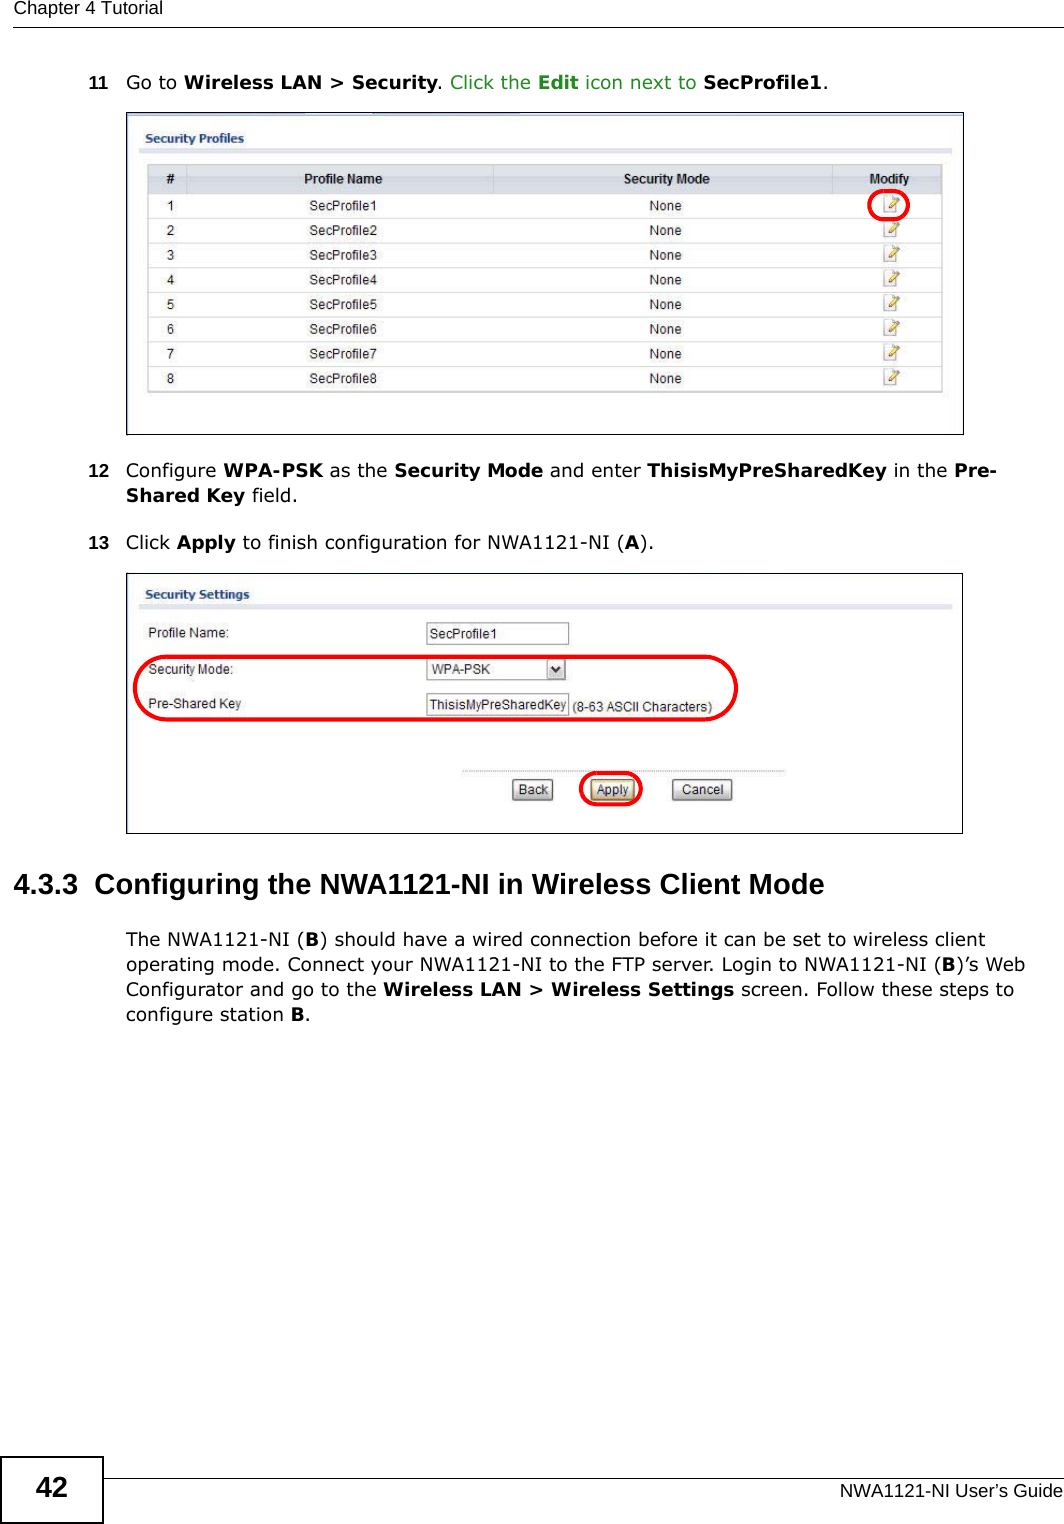 Chapter 4 TutorialNWA1121-NI User’s Guide4211 Go to Wireless LAN &gt; Security. Click the Edit icon next to SecProfile1.  12 Configure WPA-PSK as the Security Mode and enter ThisisMyPreSharedKey in the Pre-Shared Key field.13 Click Apply to finish configuration for NWA1121-NI (A). 4.3.3  Configuring the NWA1121-NI in Wireless Client ModeThe NWA1121-NI (B) should have a wired connection before it can be set to wireless client operating mode. Connect your NWA1121-NI to the FTP server. Login to NWA1121-NI (B)’s Web Configurator and go to the Wireless LAN &gt; Wireless Settings screen. Follow these steps to configure station B.